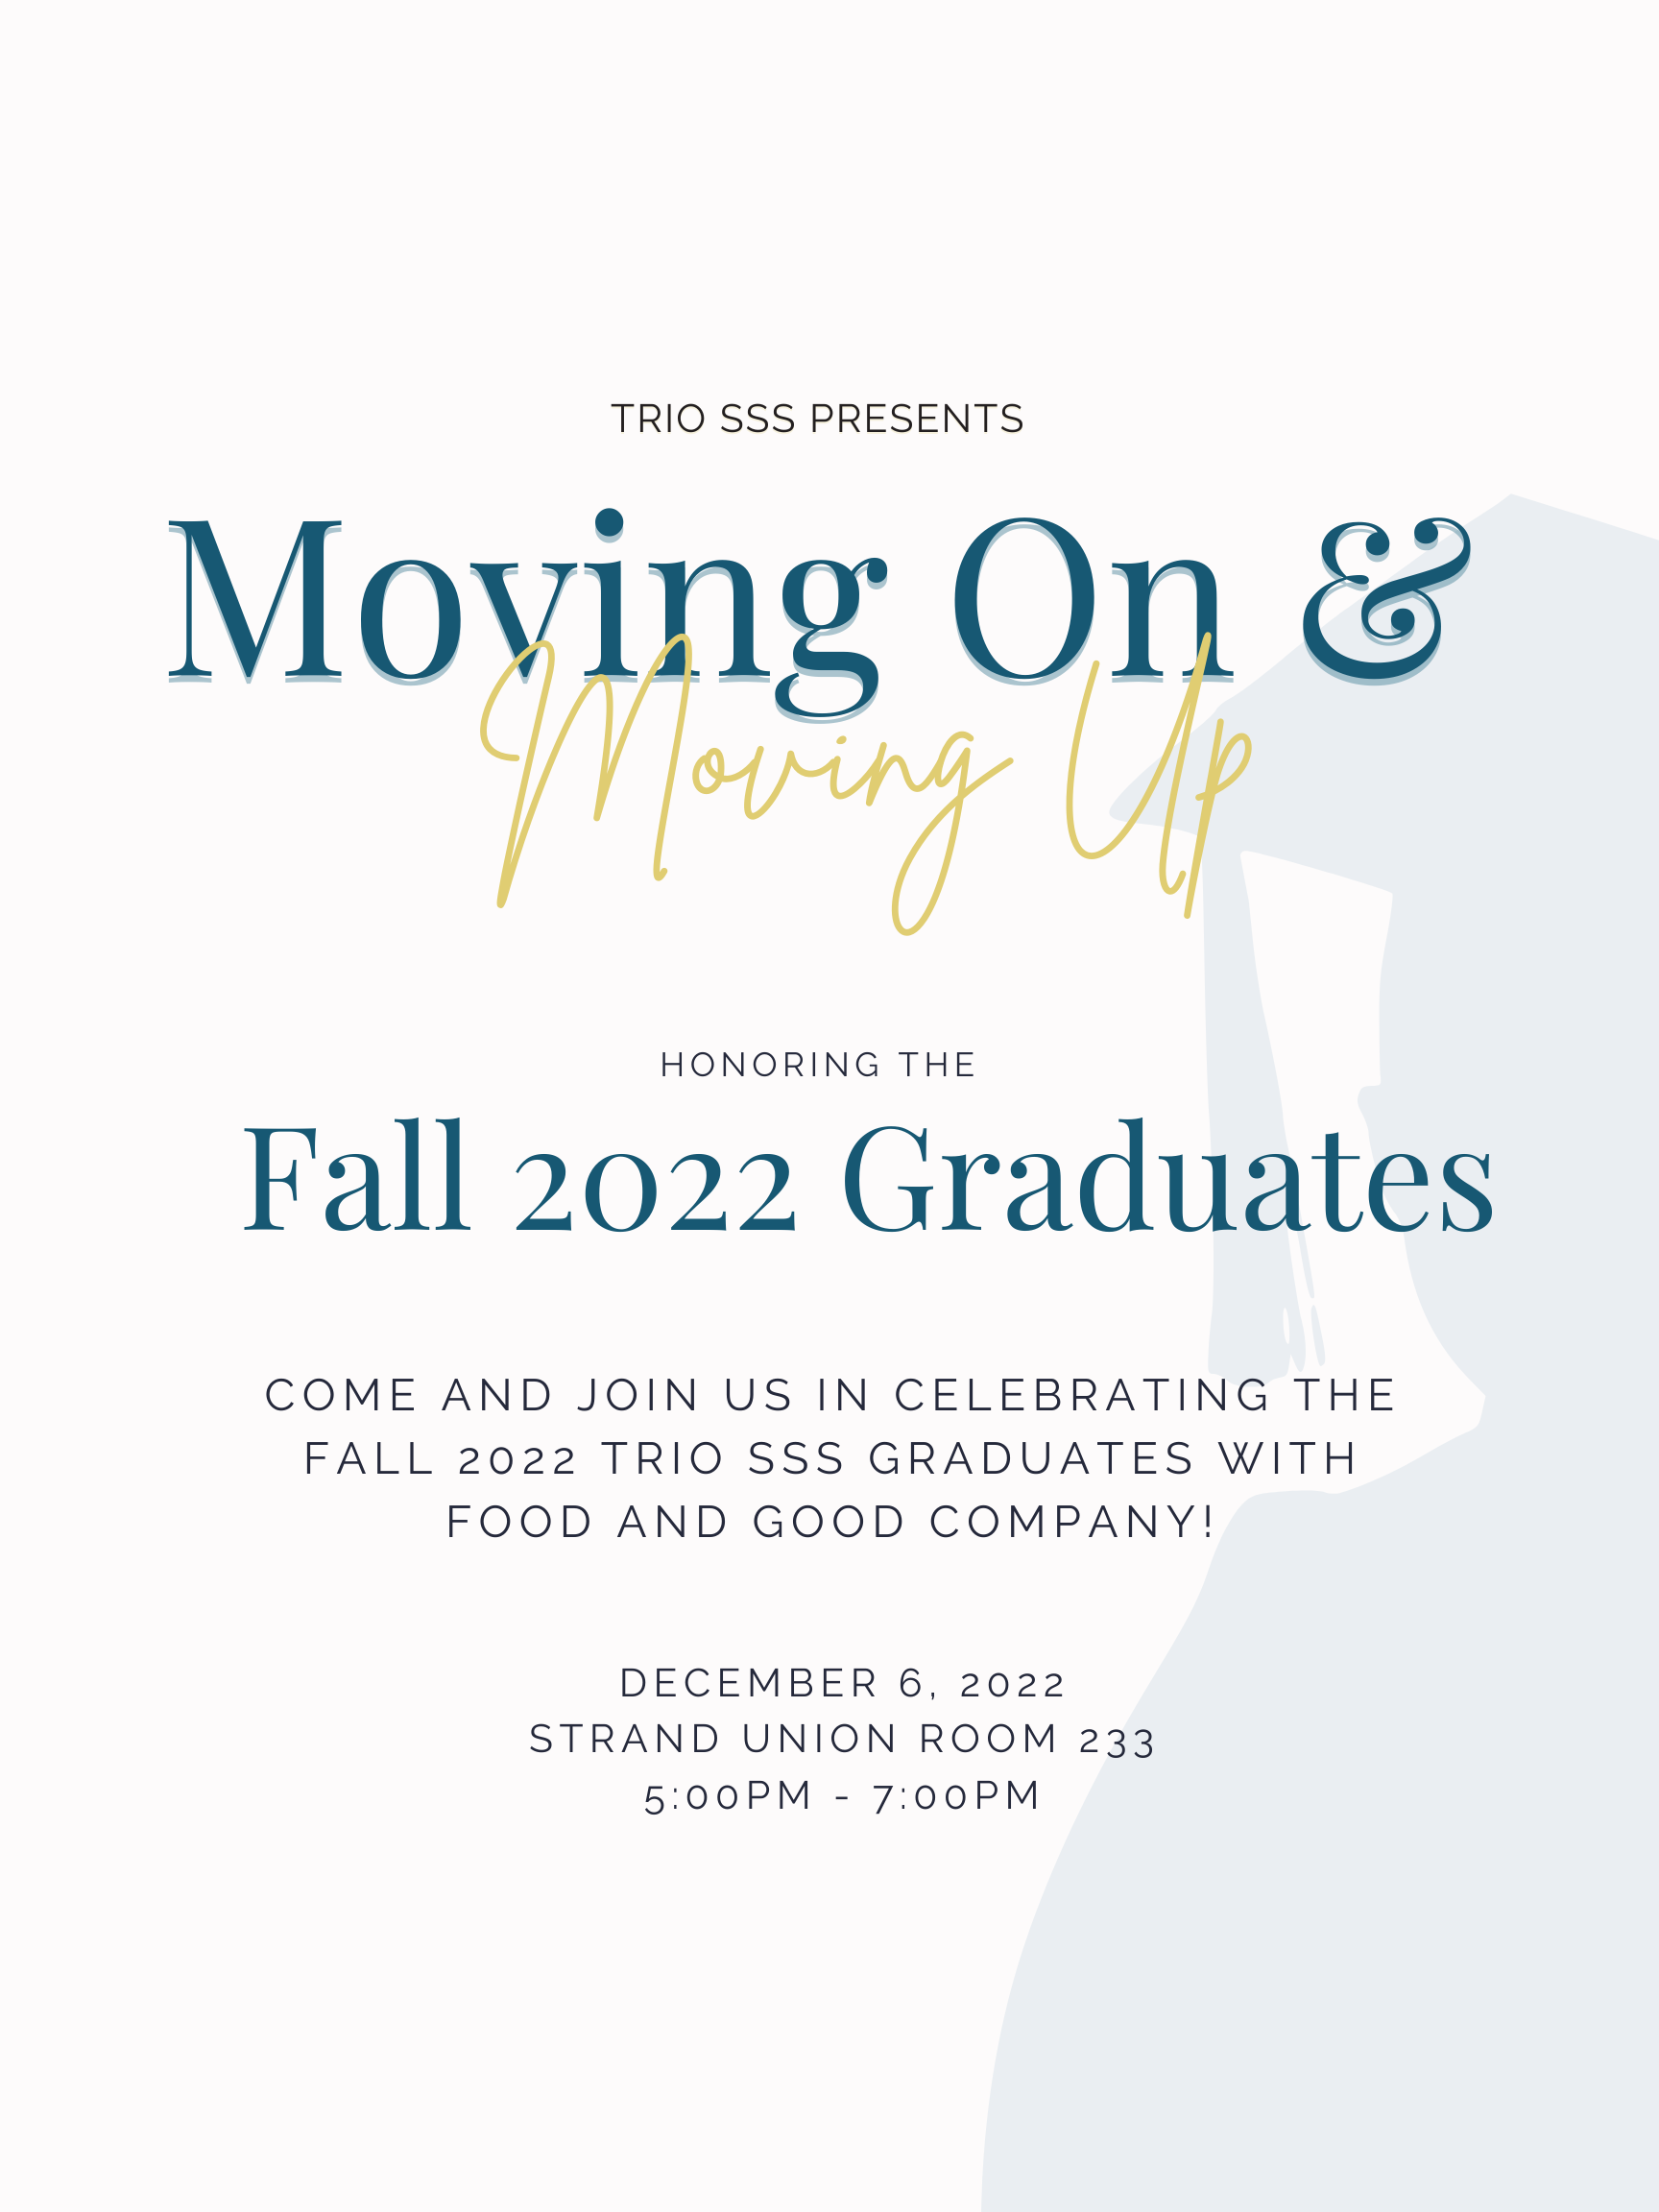 TRIO SSS Presents Moving On and Moving Up: Honoring the fall 2022 graduates. Come and join us in celebrating the fall 2022 TRIO SSS graduates with food and good company! December 6, 2022 Strand Union Room 233 5:00 pm - 7:00pm